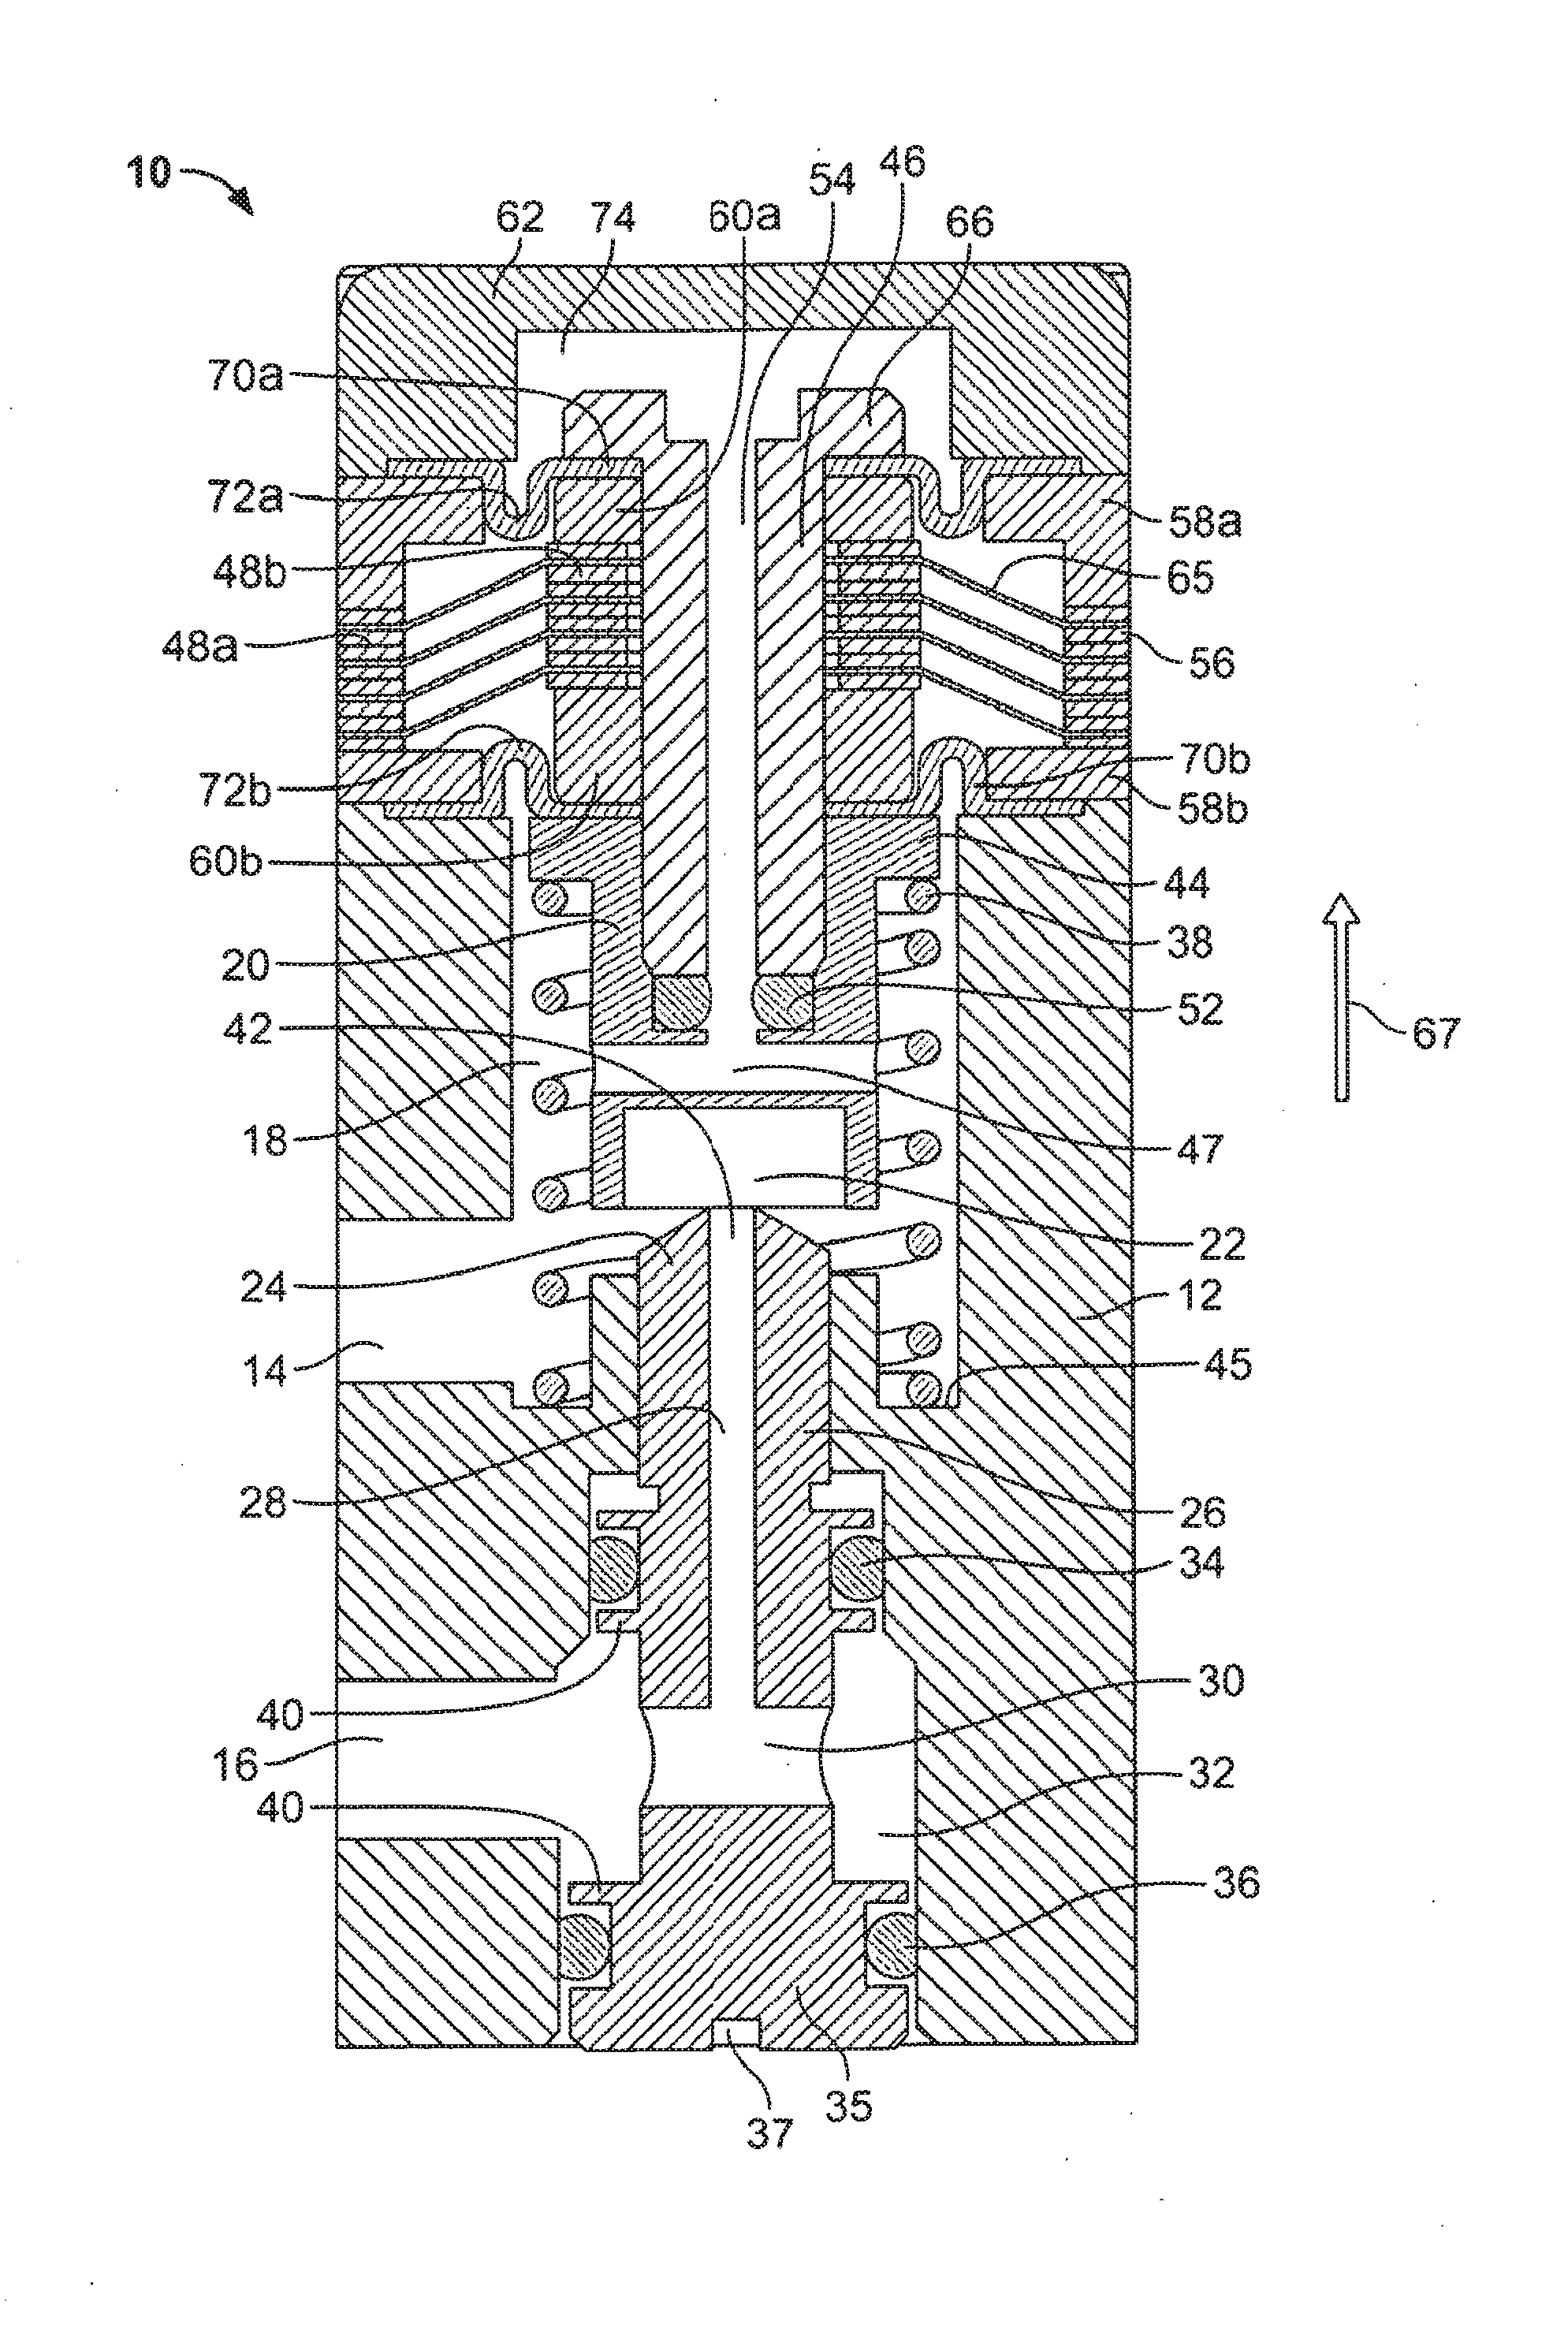 Fluid control systems employing compliant electroactive materials